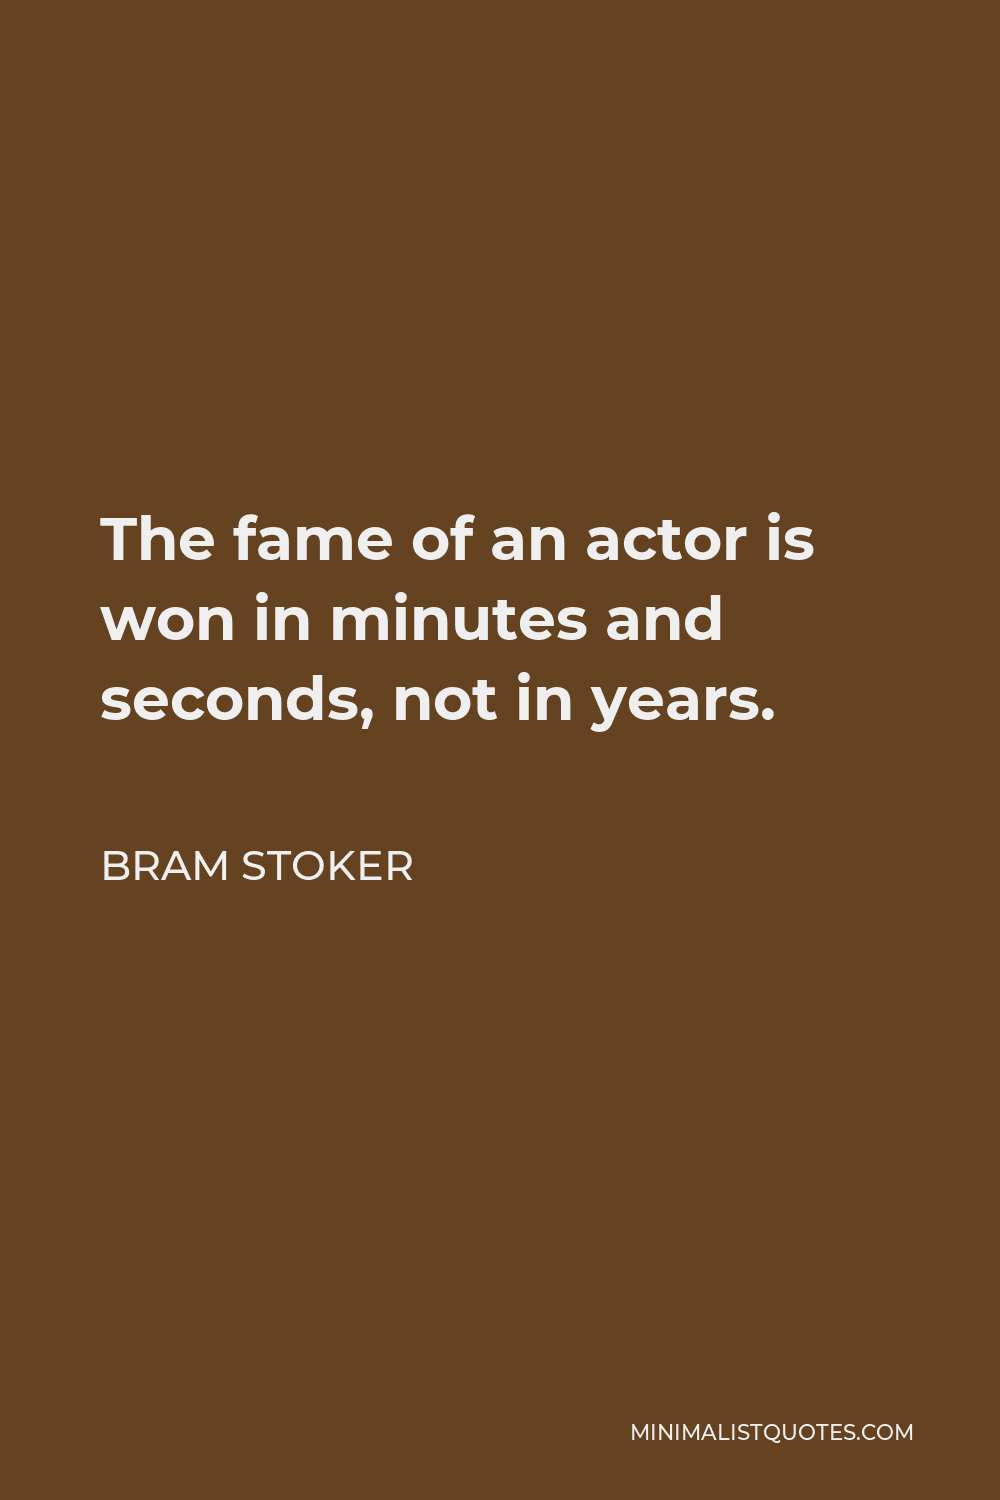 Bram Stoker Quote - The fame of an actor is won in minutes and seconds, not in years.